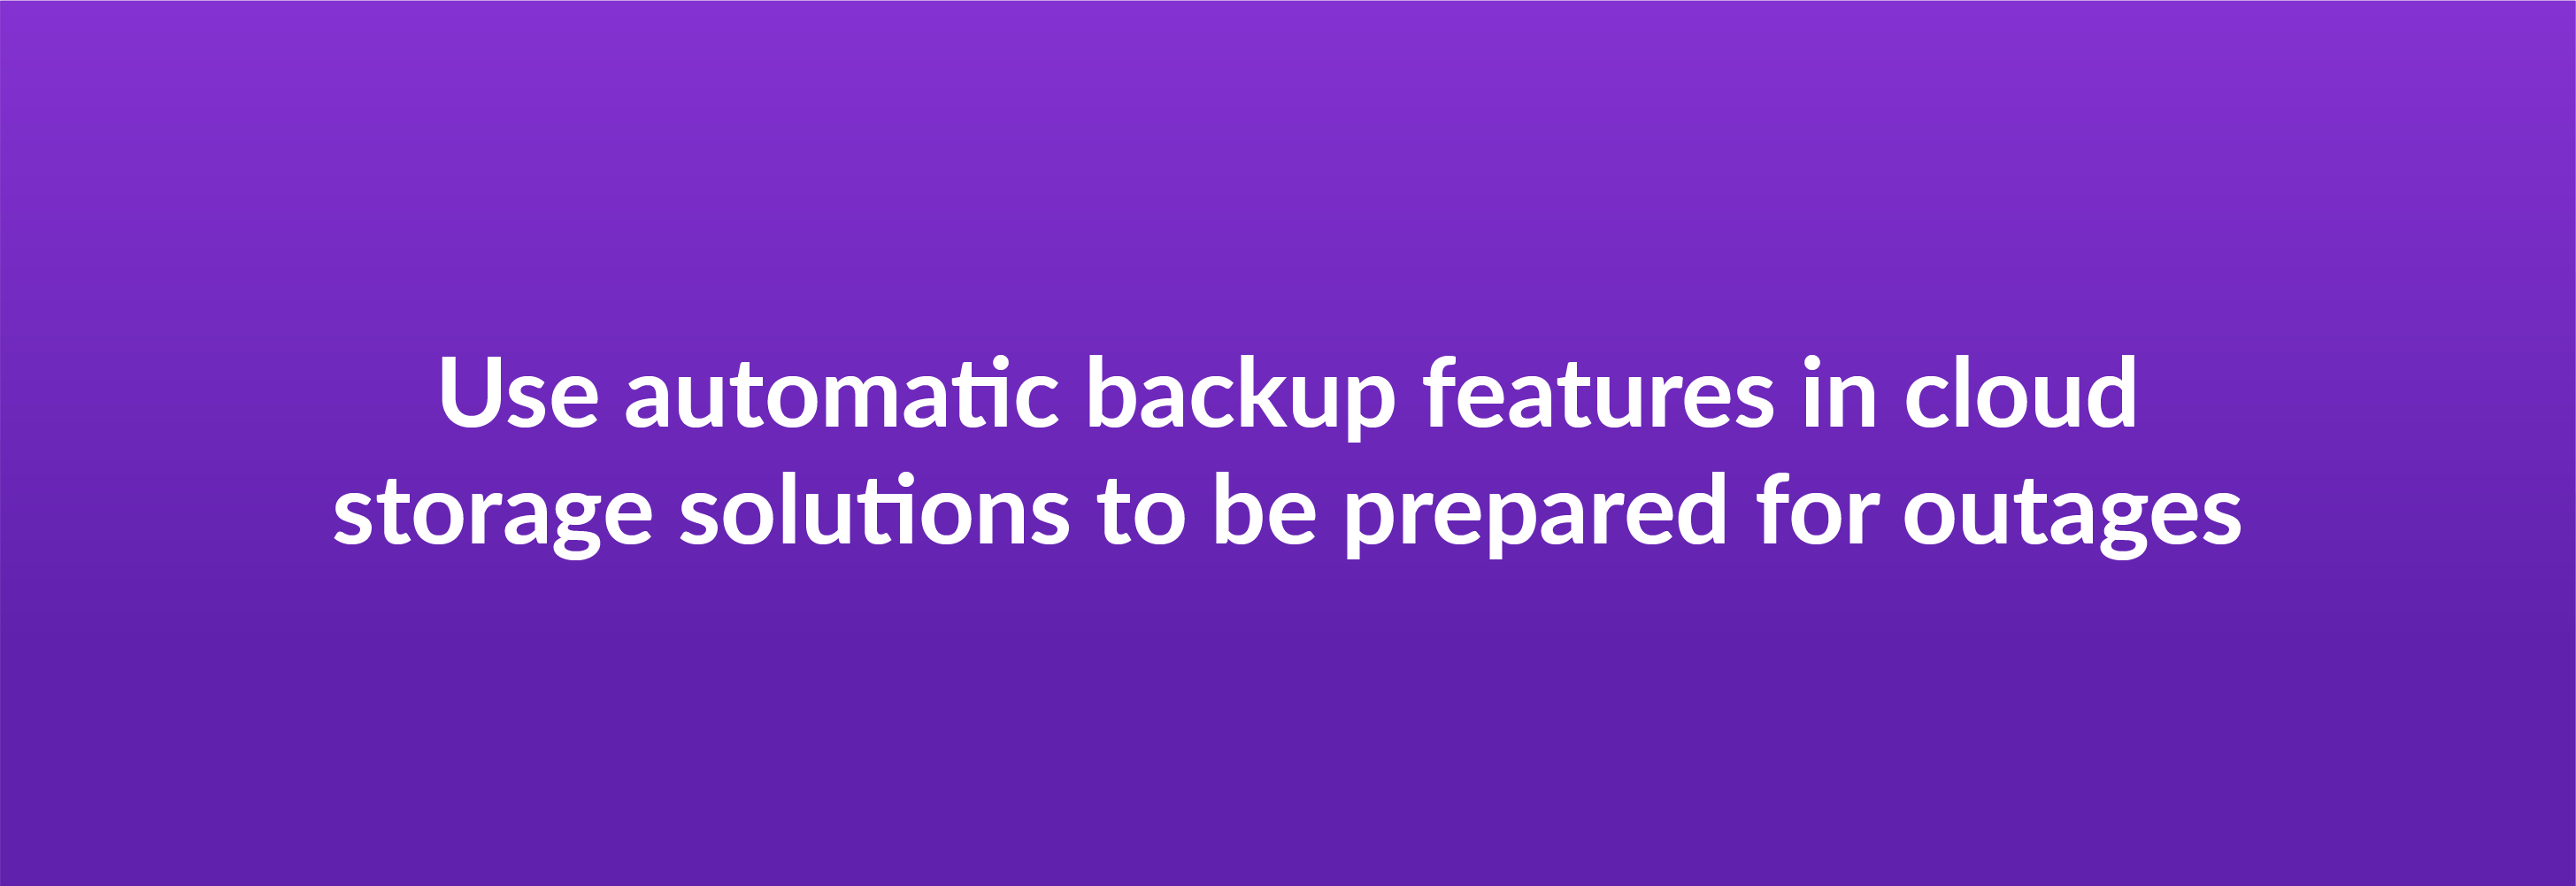 Use automatic backup features in cloud storage solutions to be prepared for outages